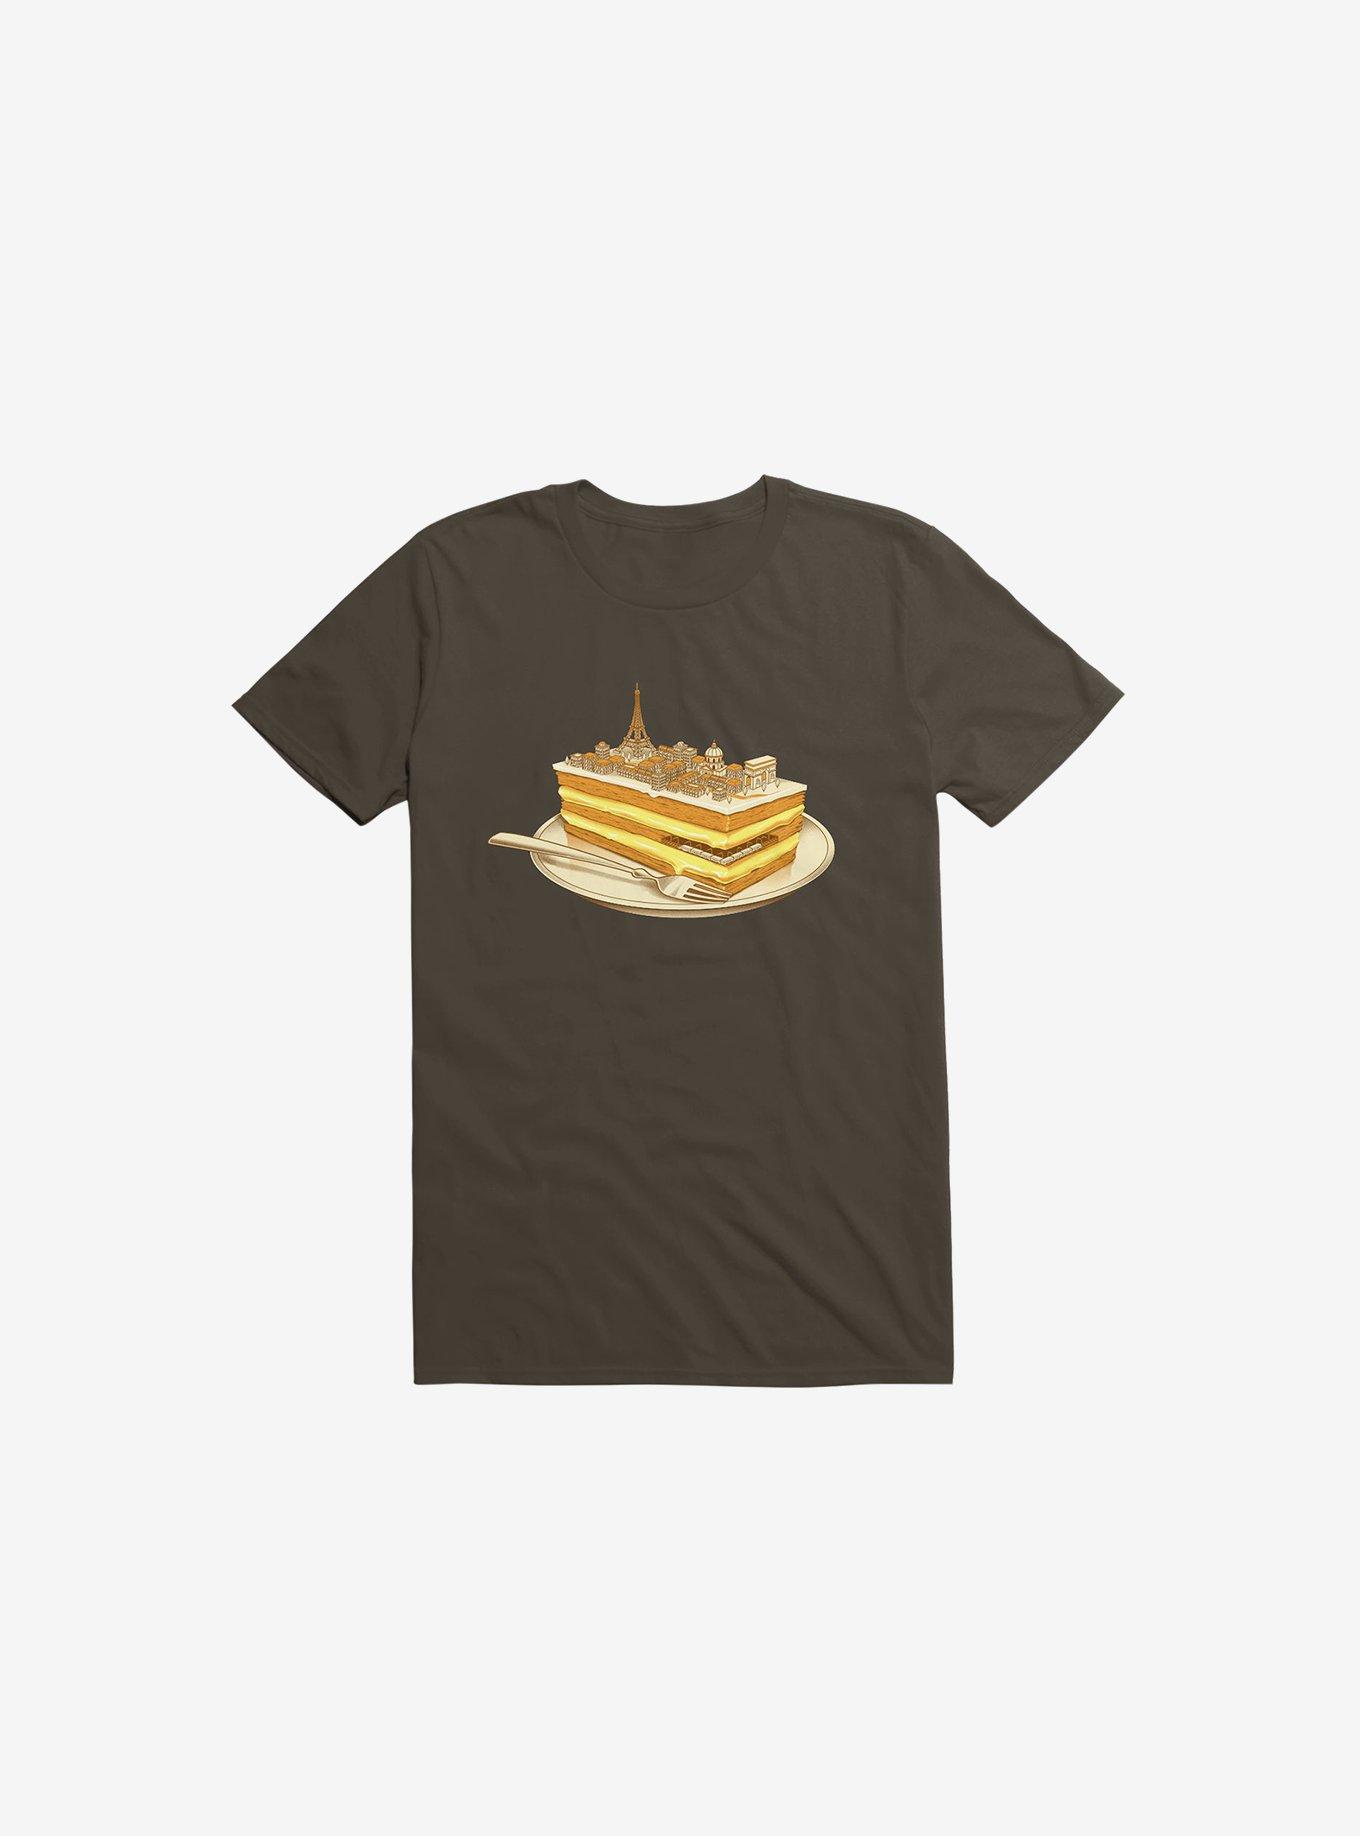 Hungry For Travels: Slice of Paris T-Shirt, BROWN, hi-res